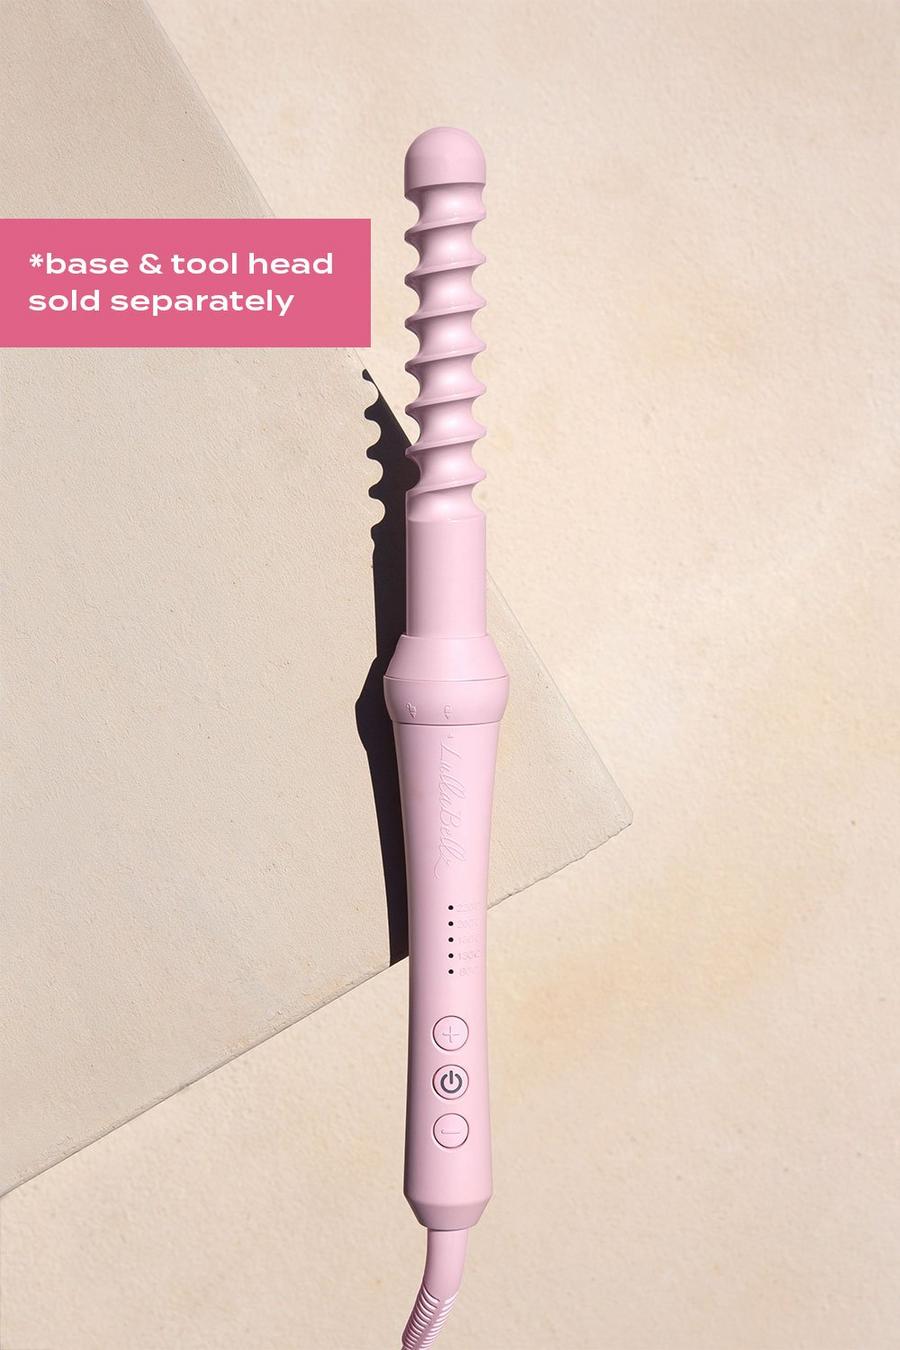 Lullabellz - Hair Tools - Go Easy Curl Wand, Baby pink rosa